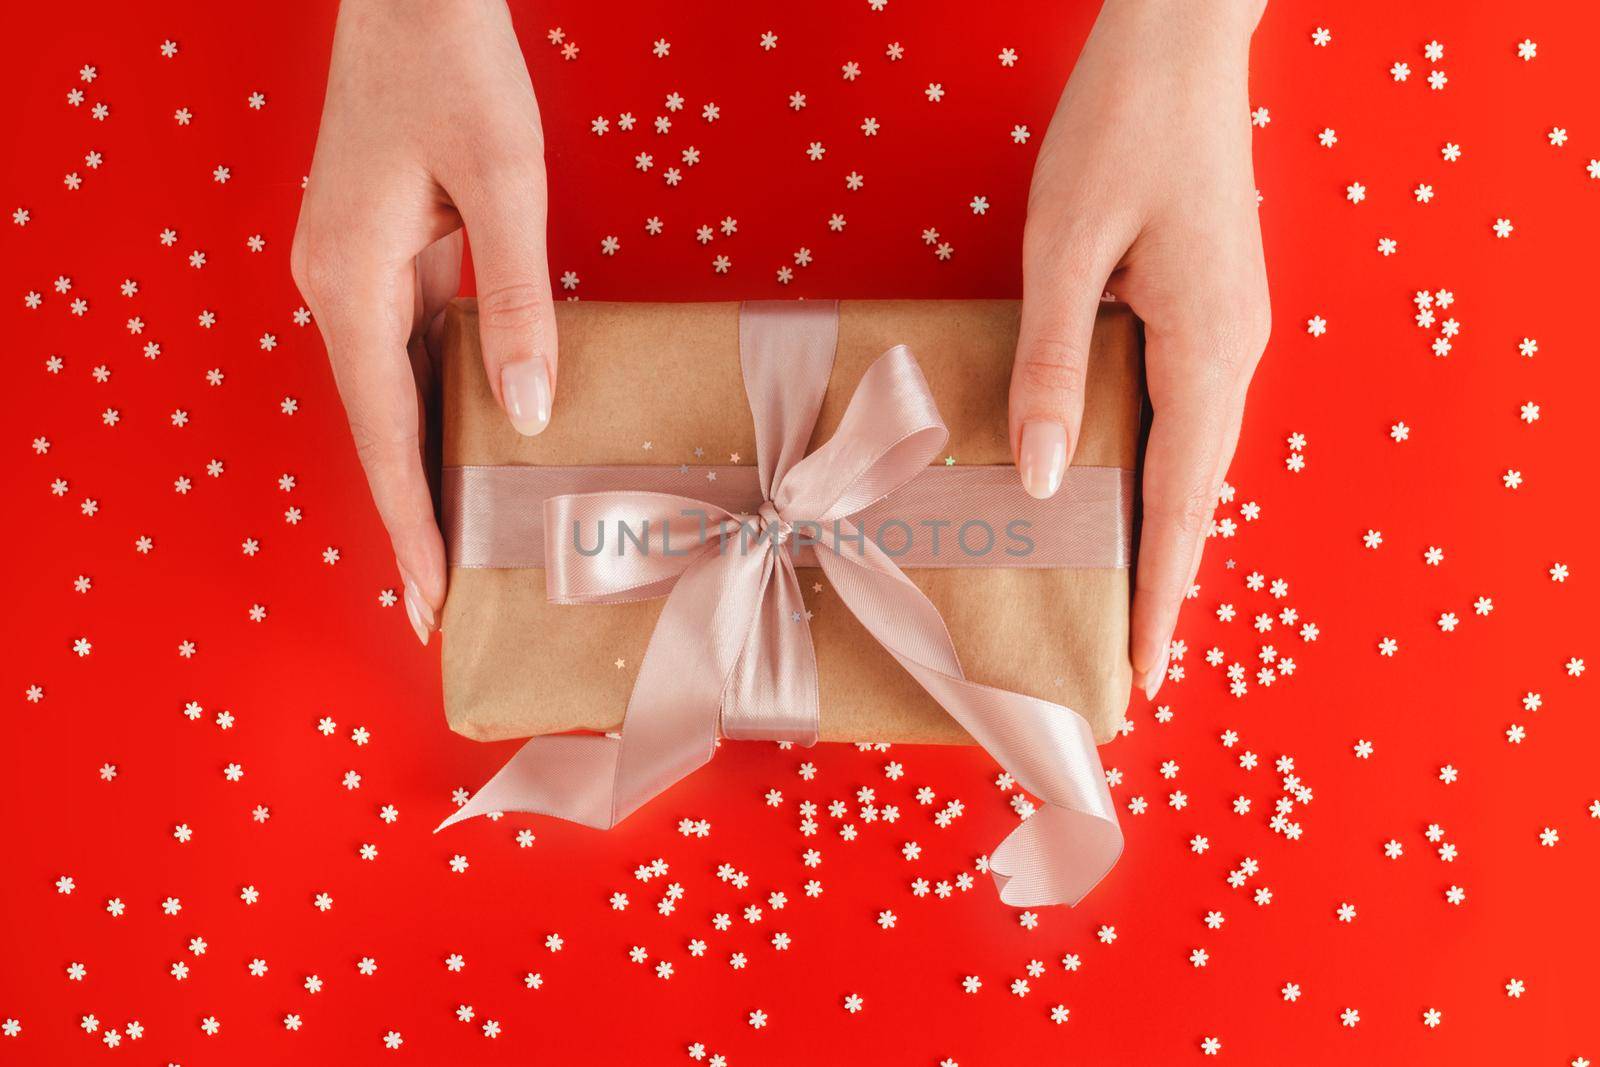 Nice female hands holding gift box wrapped in kraft paper with pink ribbon on festive red background with many snowflakes. Xmas and New Year postcard design. Giving love and warmth, Christmas concept